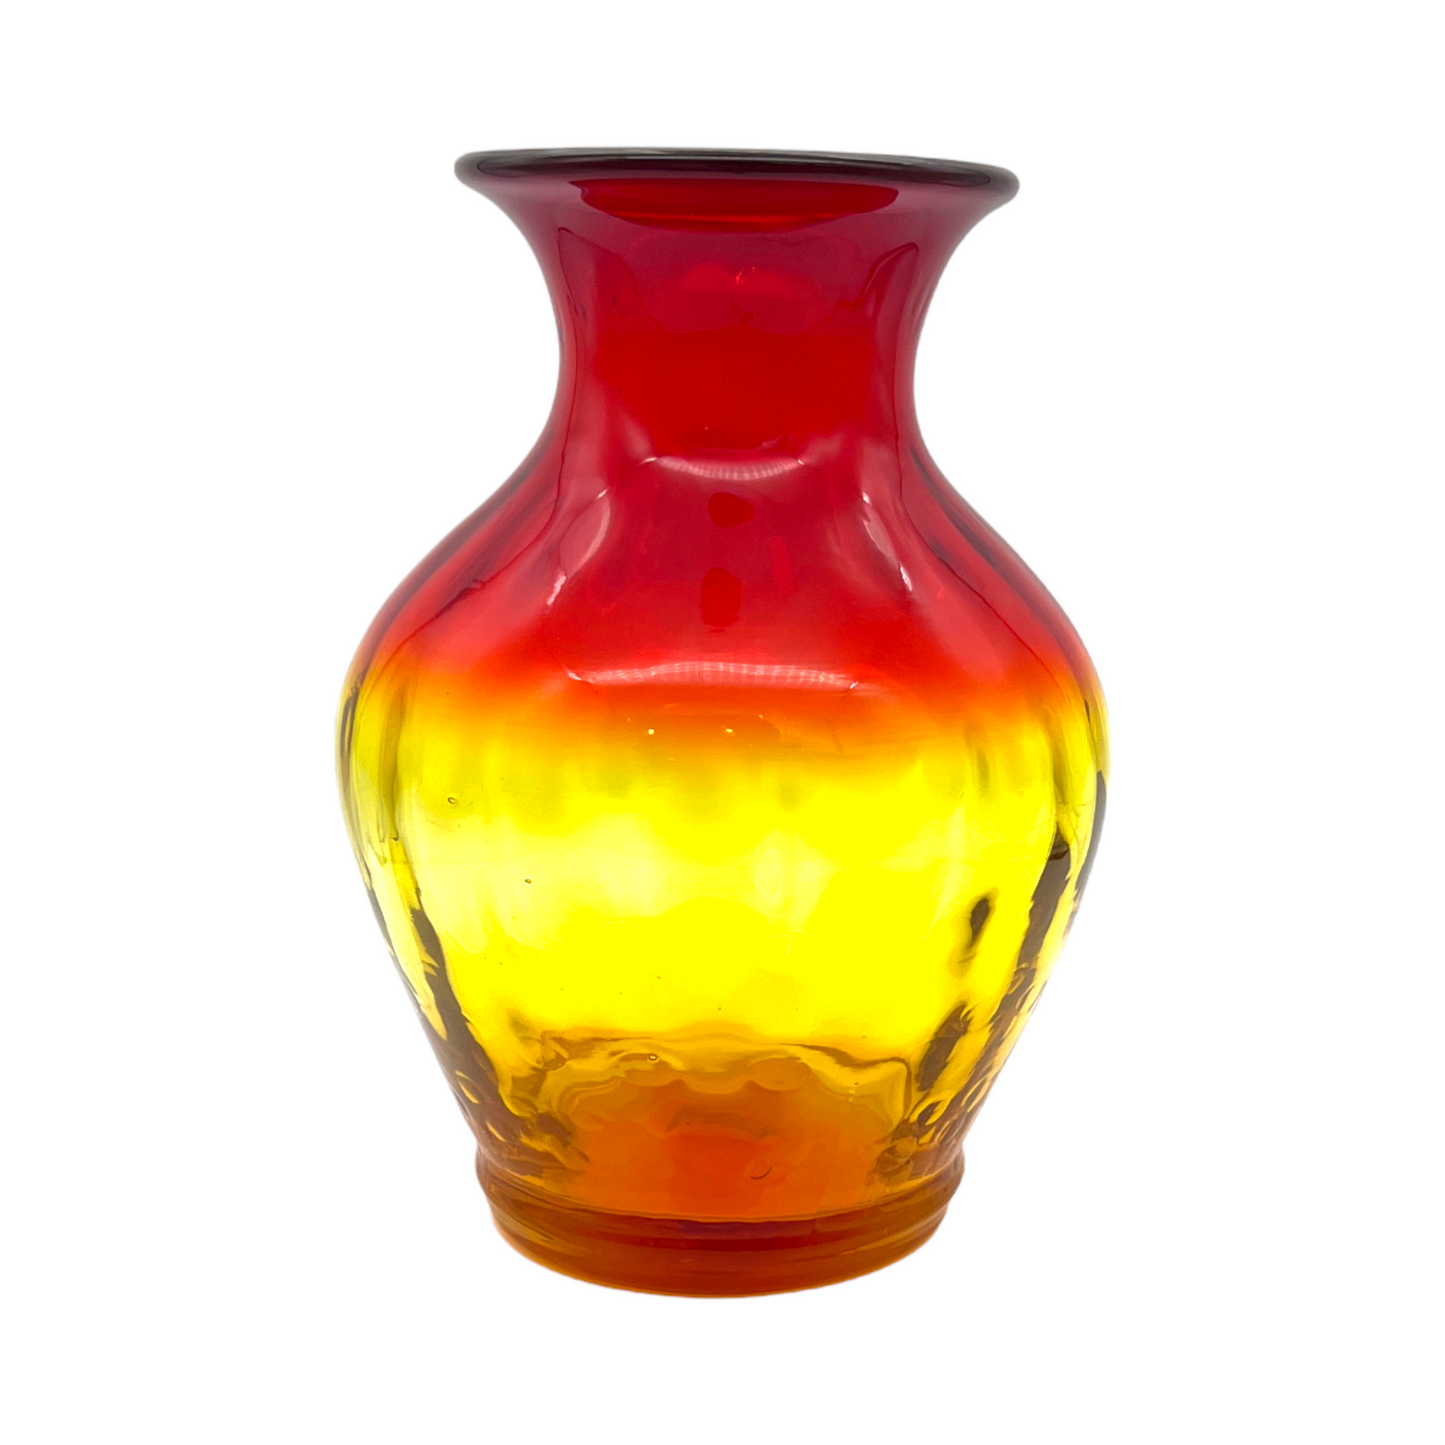 Amberina - Inverted Coin Glass Vase - Glows - Vintage - Large - 8"